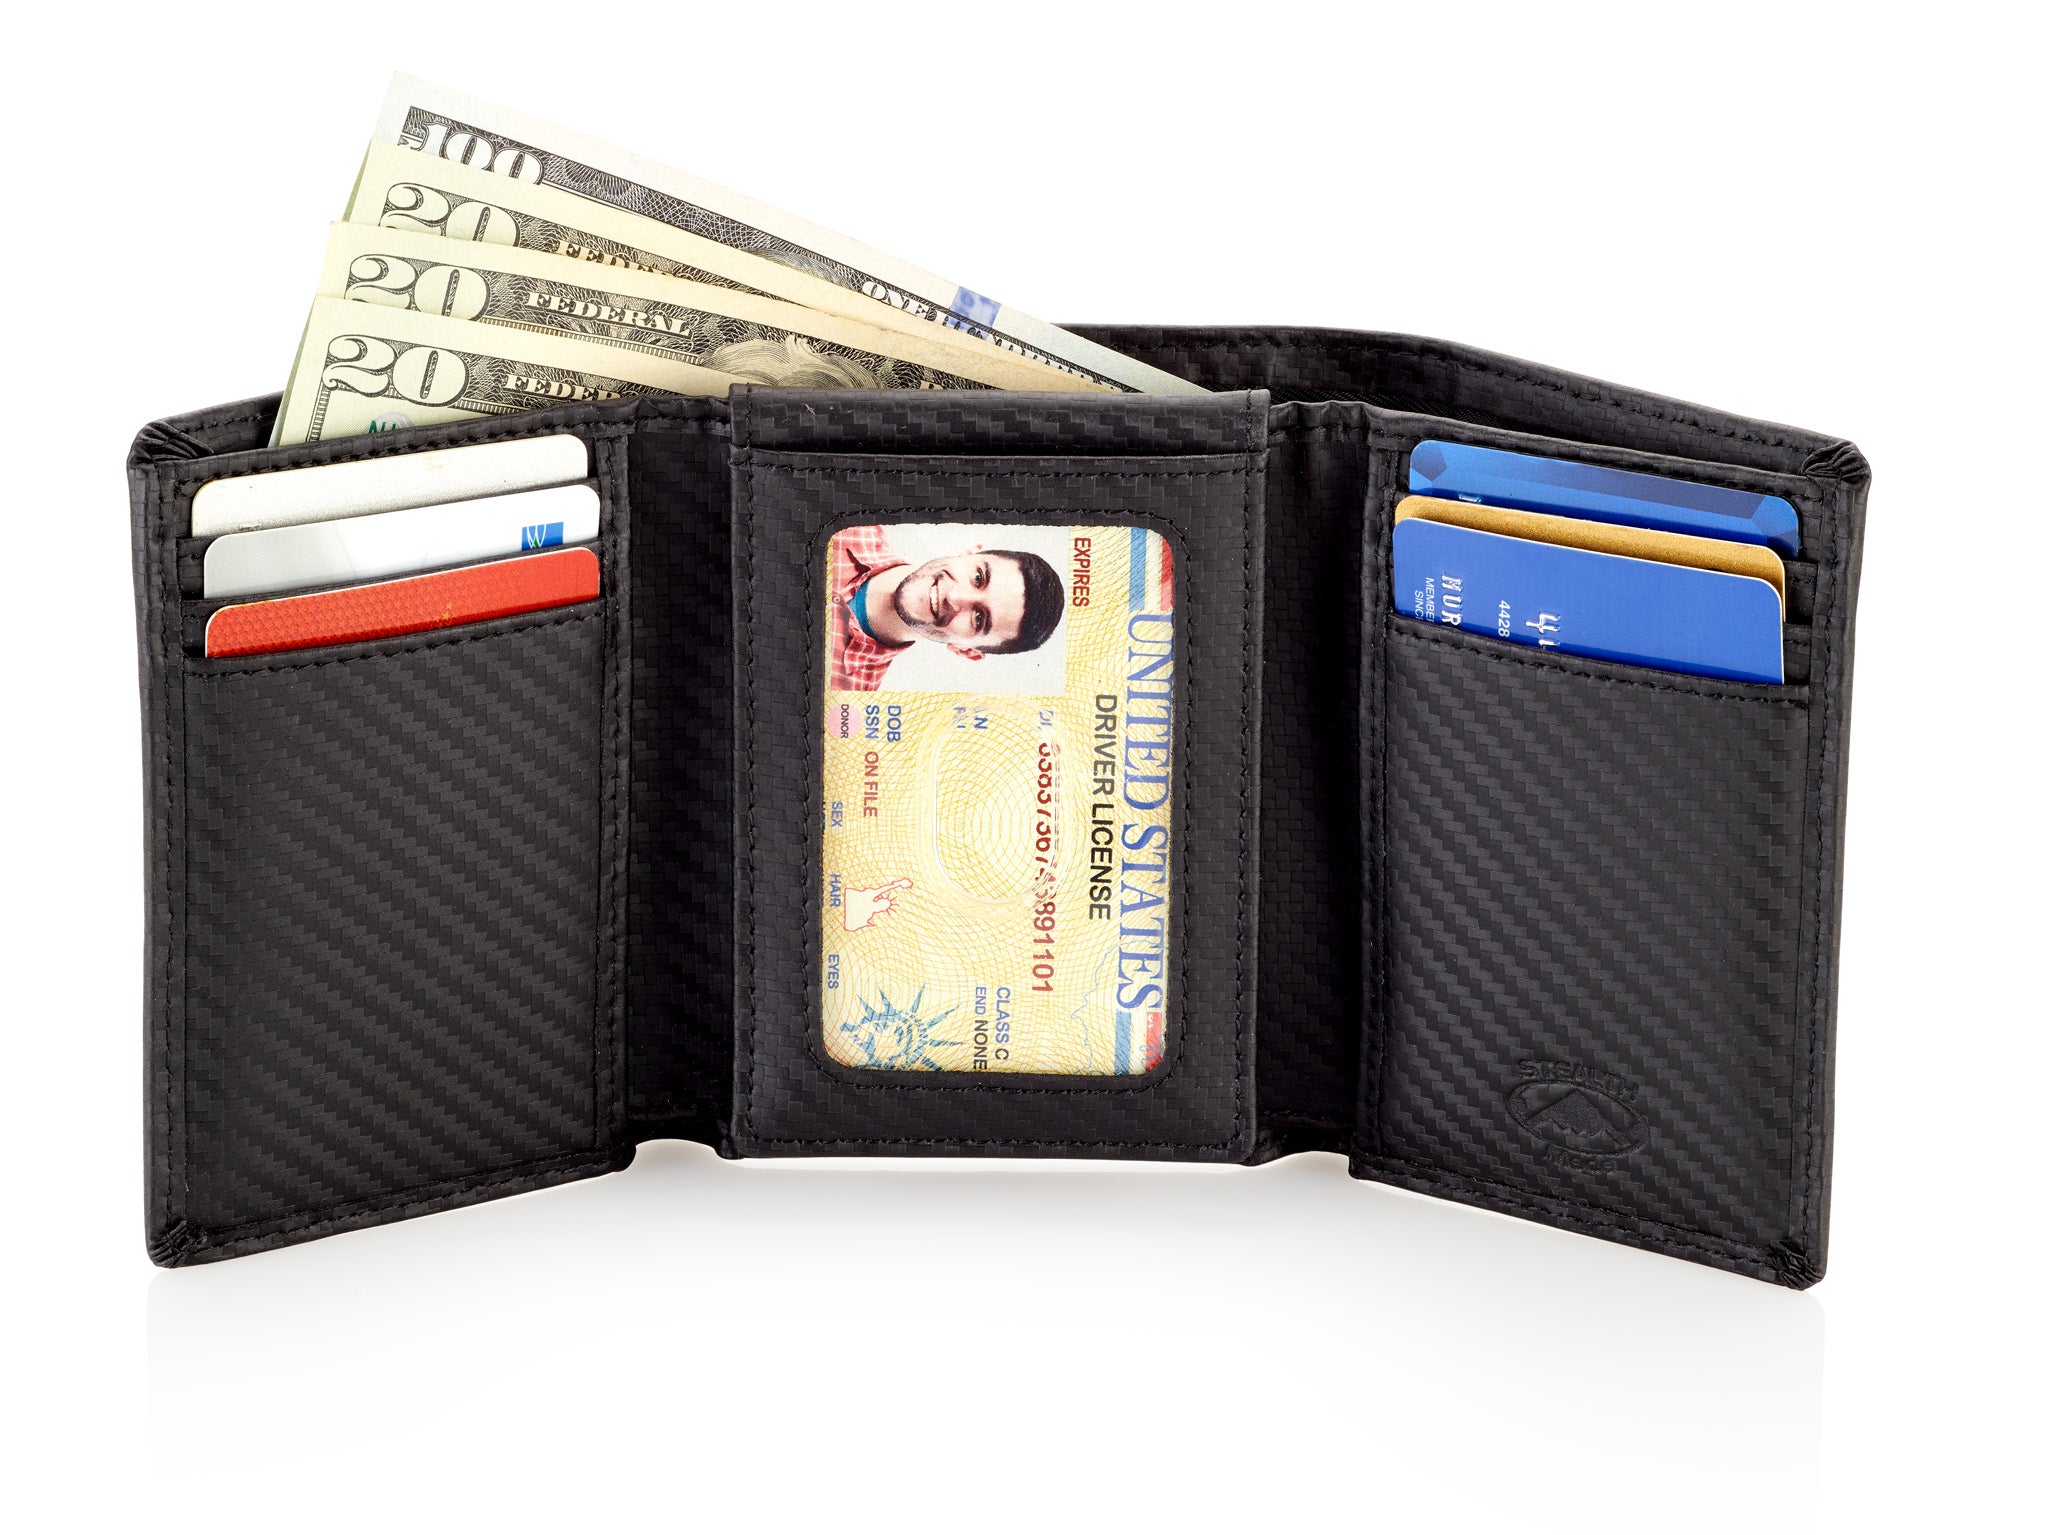 Trifold Leather Wallet for Men with ID Holder and RFID Blocking (Carbon Fiber)